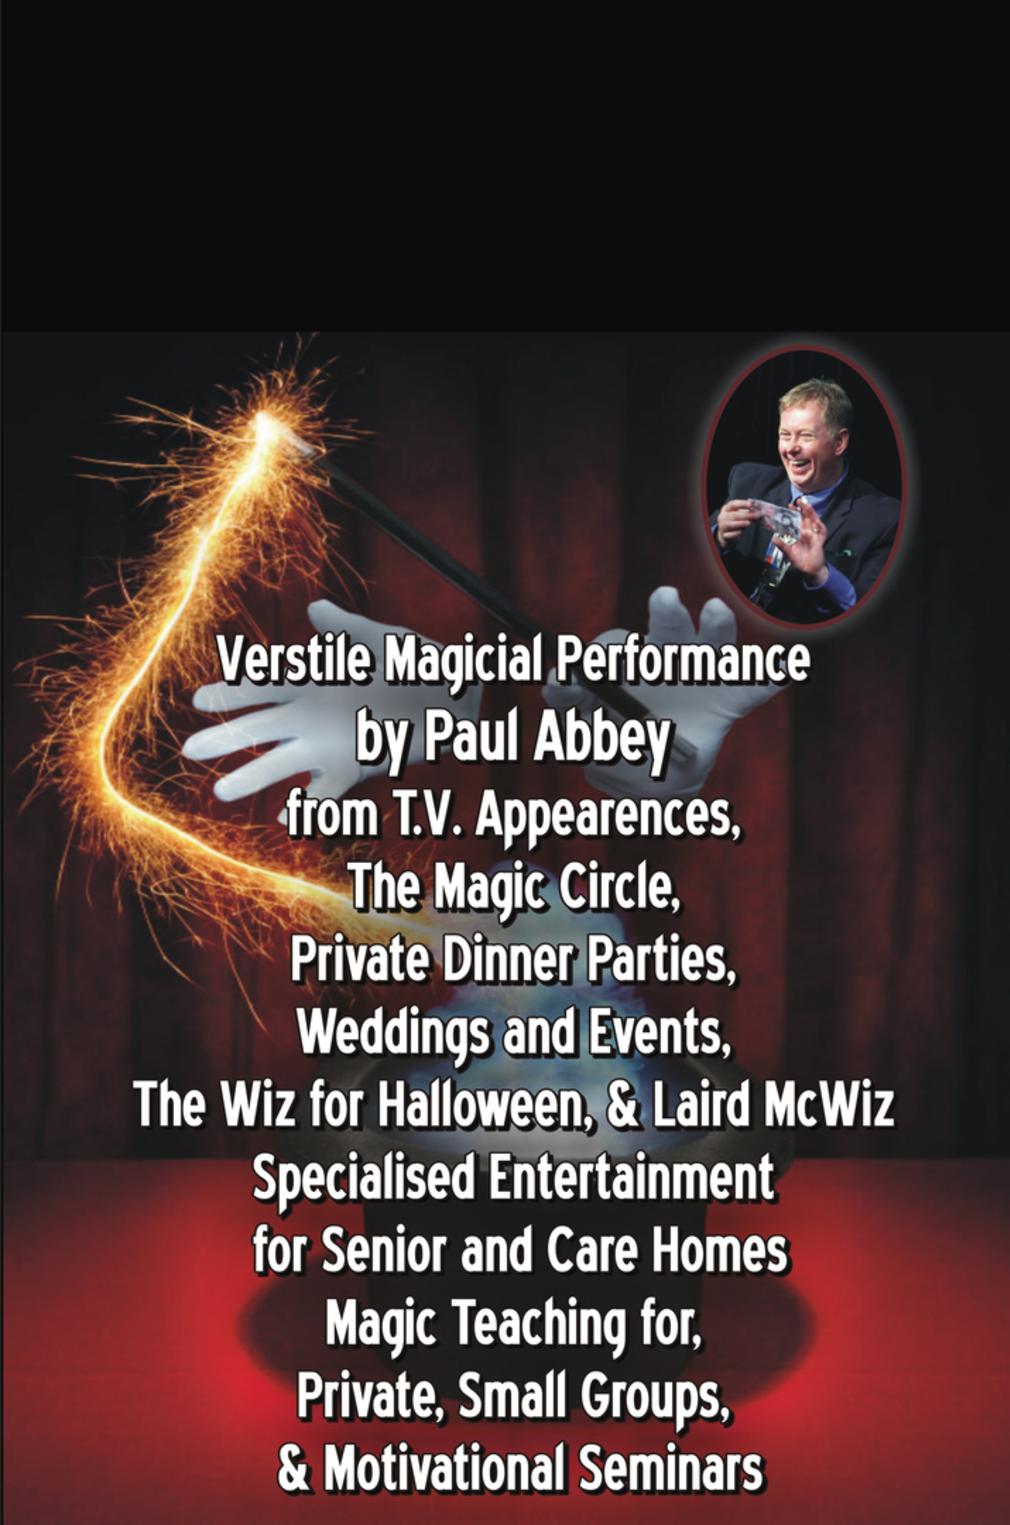 Verstile Magicial Performance by Paul Abbey from T.V. Appearences, The Magic Circle, Private Dinner Parties, Weddings and Events, The Wiz for Halloween, & Laird McWiz Specialised Entertainment for Senior and Care Homes Magic Teaching for, Private, Small Groups, & Motivational Seminars